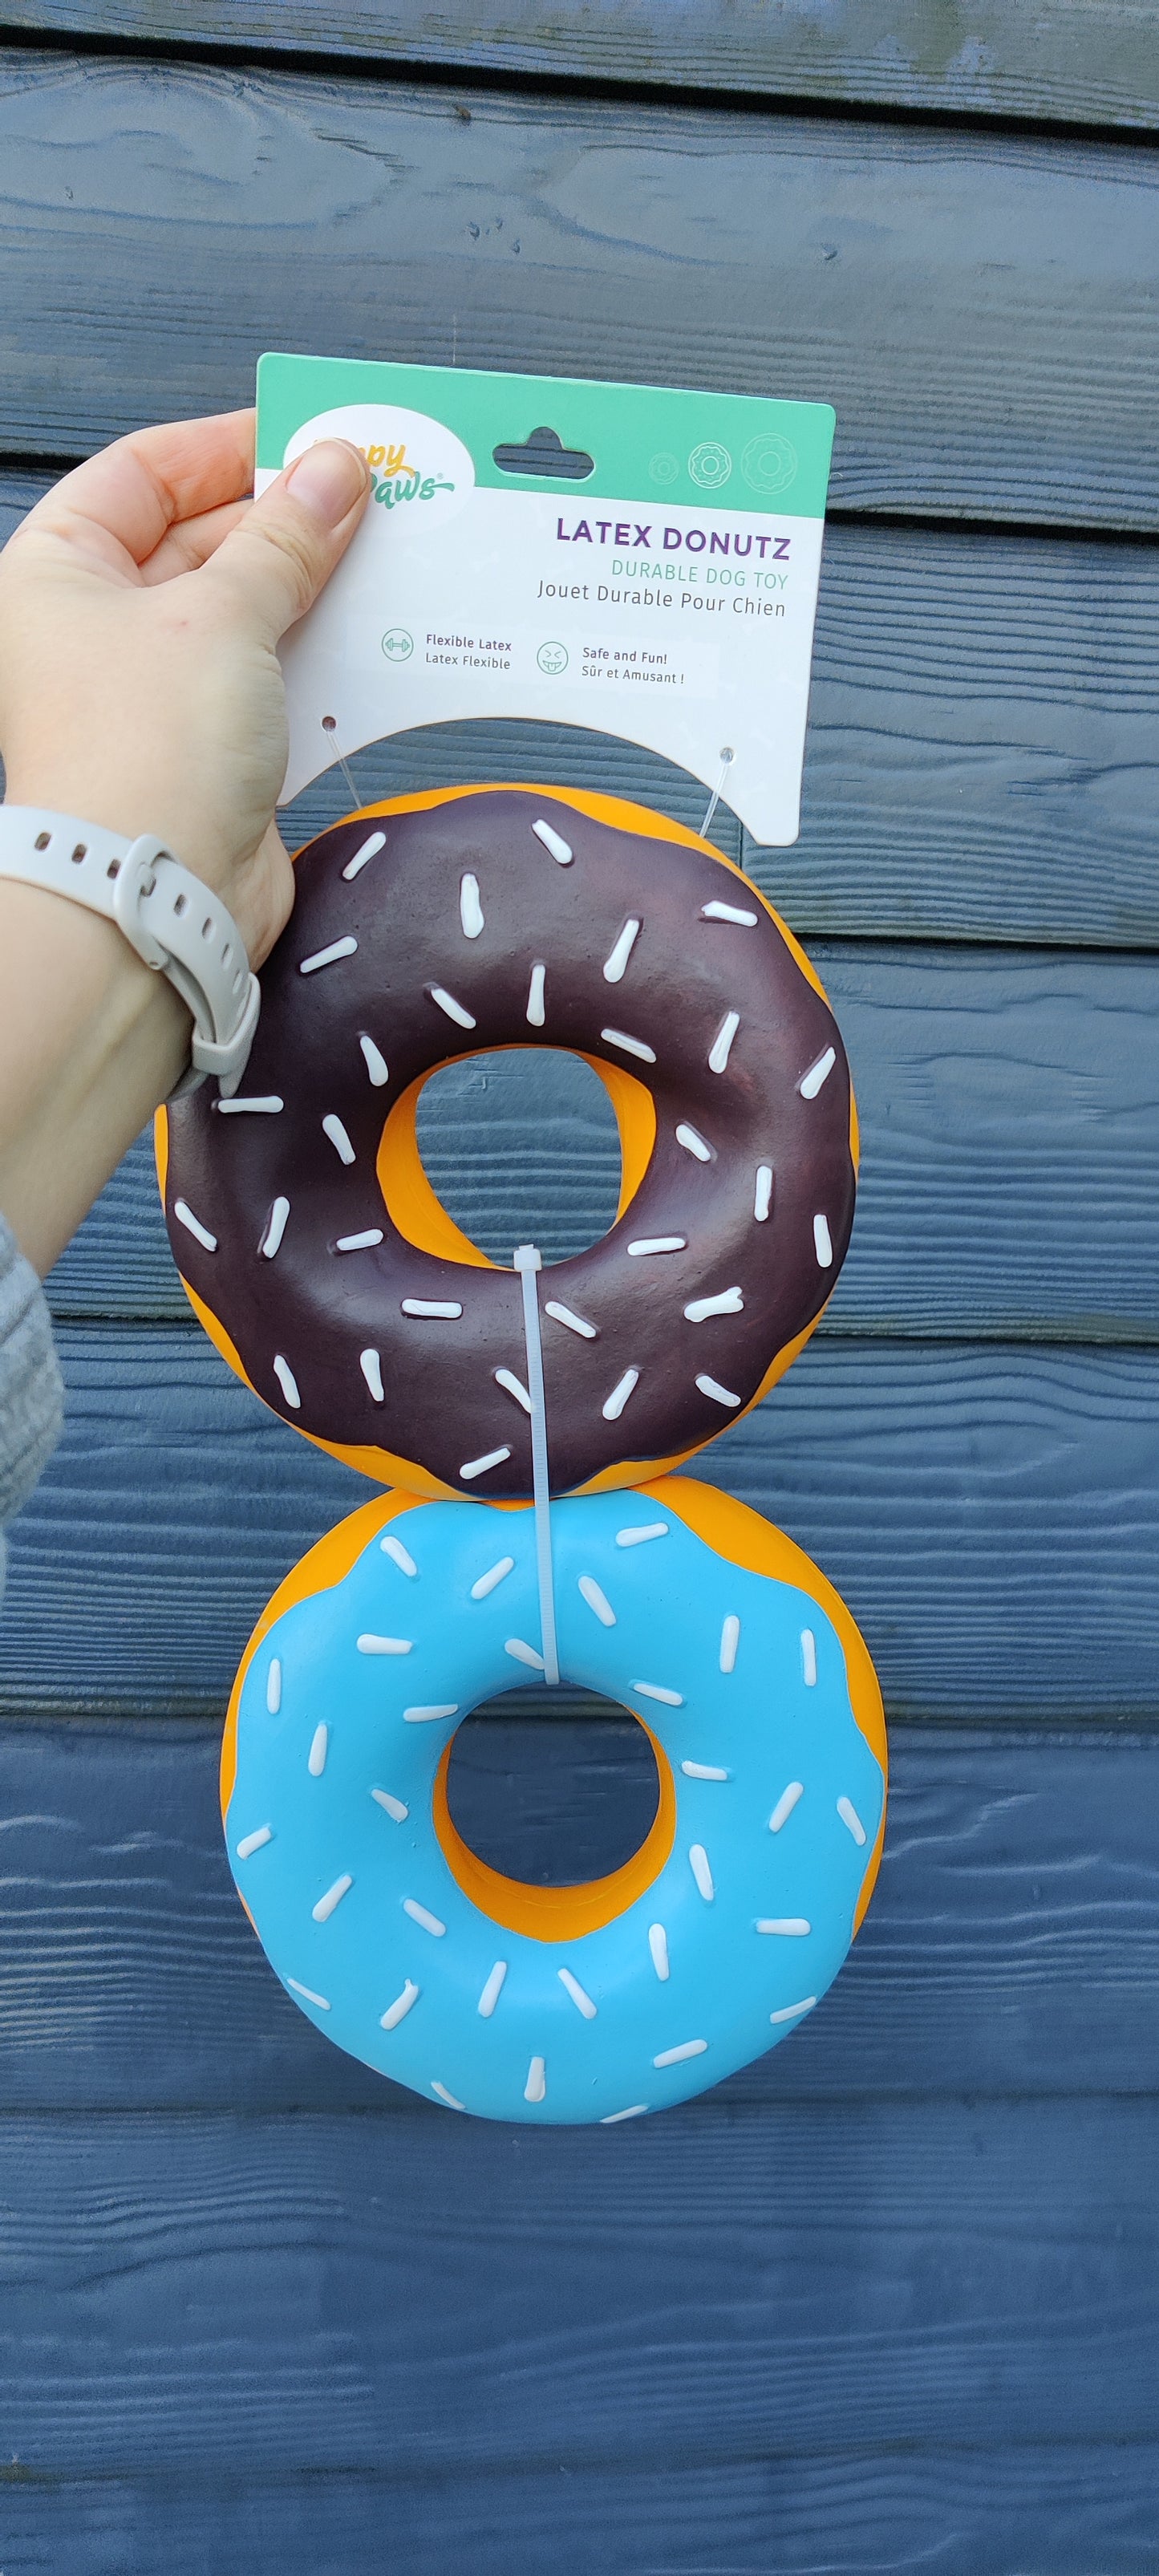 ZippyPaws - Latex Donuts Chocolate & Blueberry | Piep kauw speelgoed hond/puppy